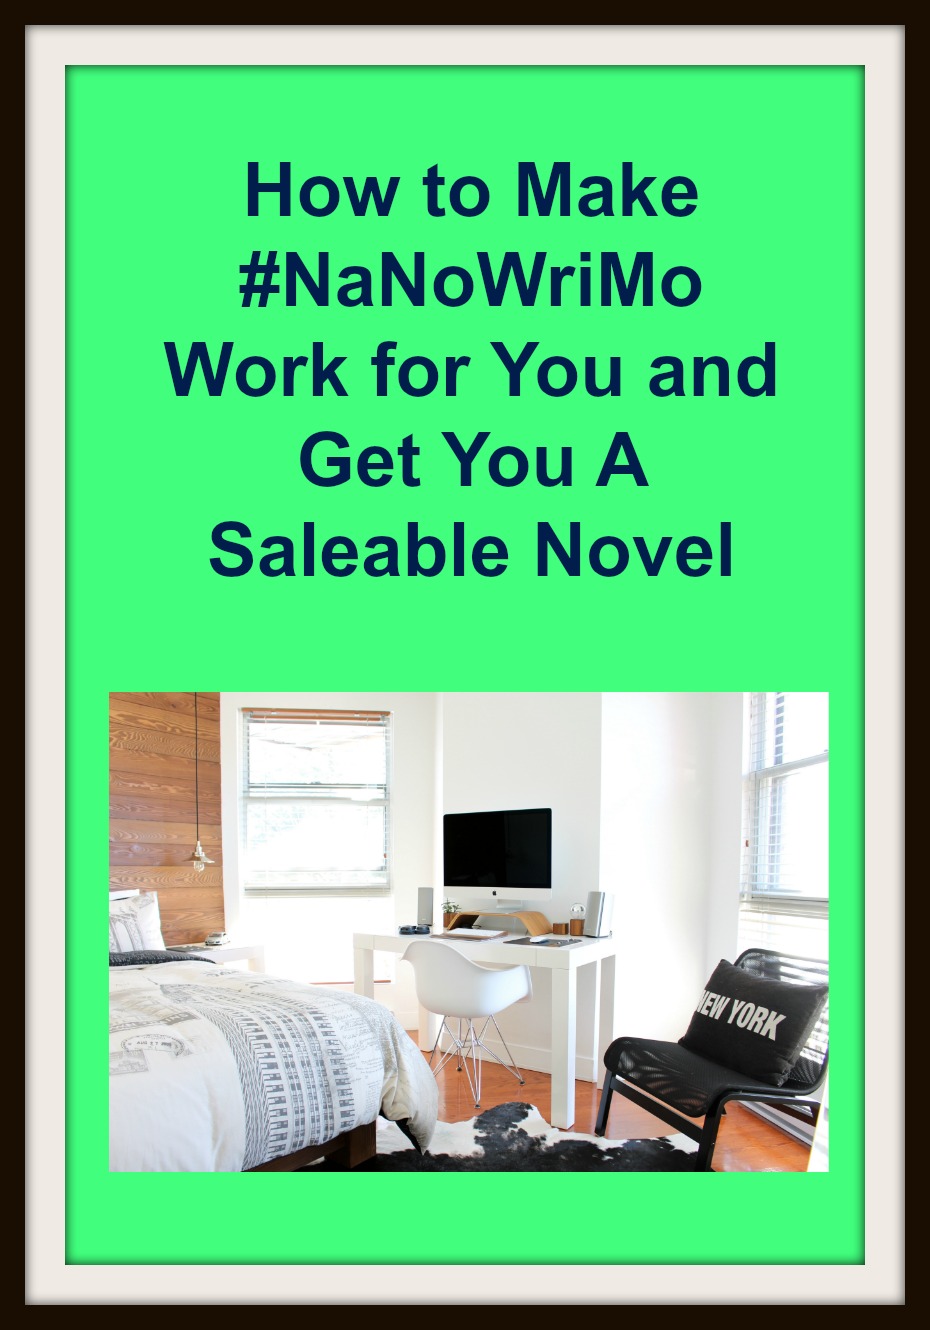 How to Make #NaNoWriMo Work for You and Get You A Saleable Novel in dark blue text on a green background above a picture of a computer in a bedroom